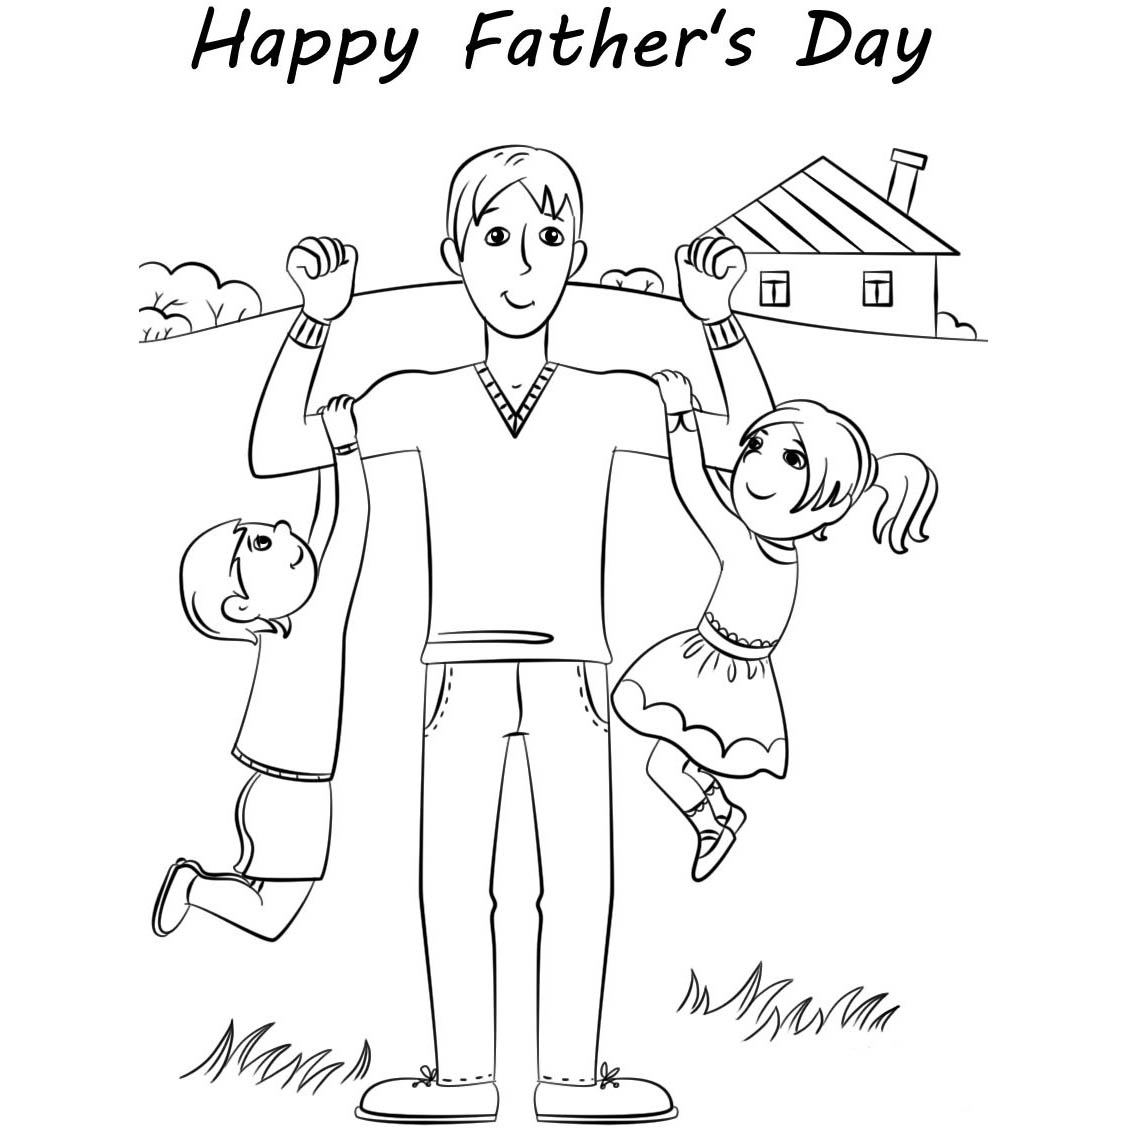 Free Happy Father's Day Coloring Pages Dad with Son and Daughter printable